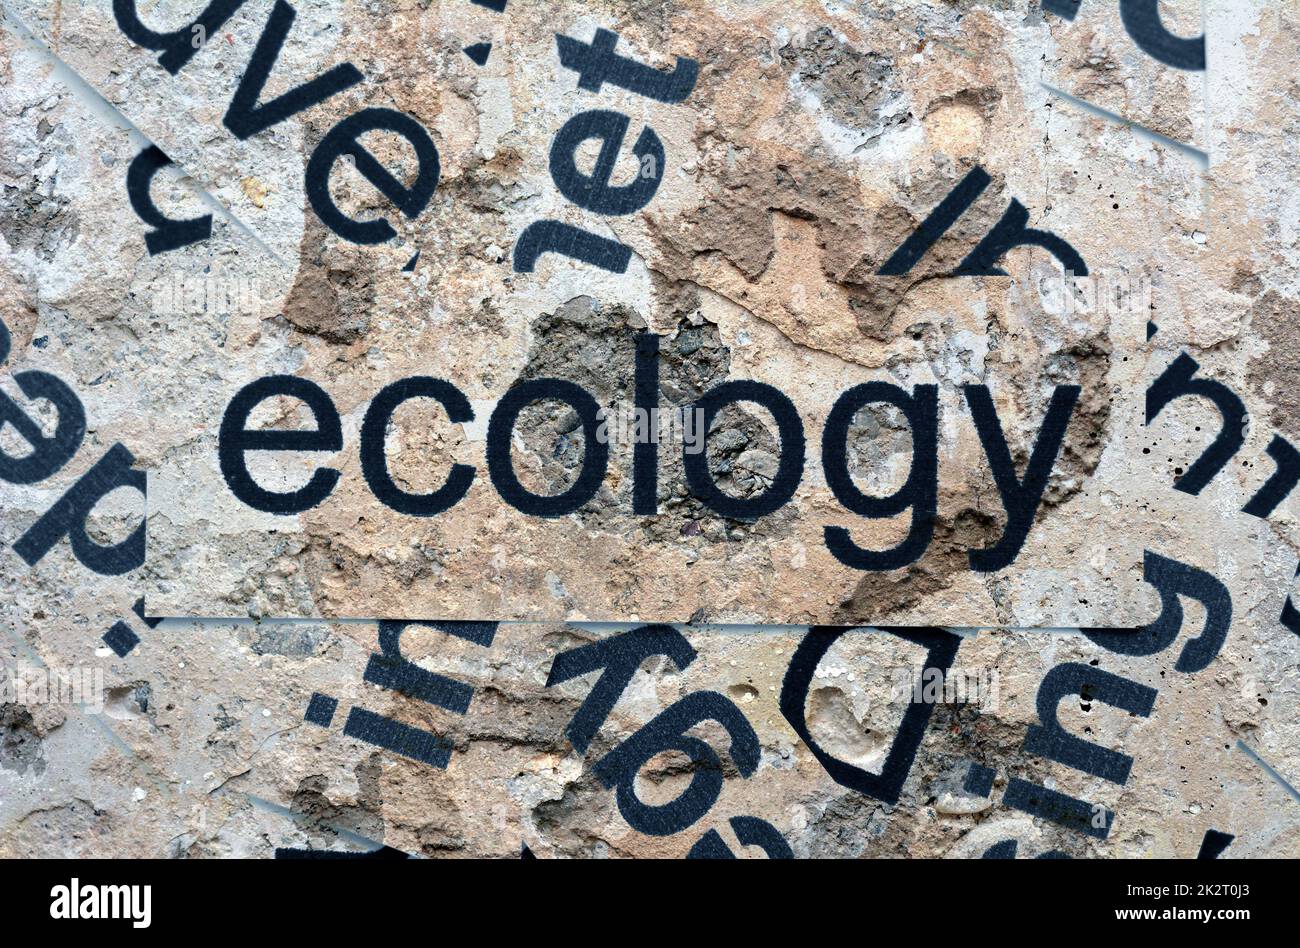 Ecology word cloud Stock Photo